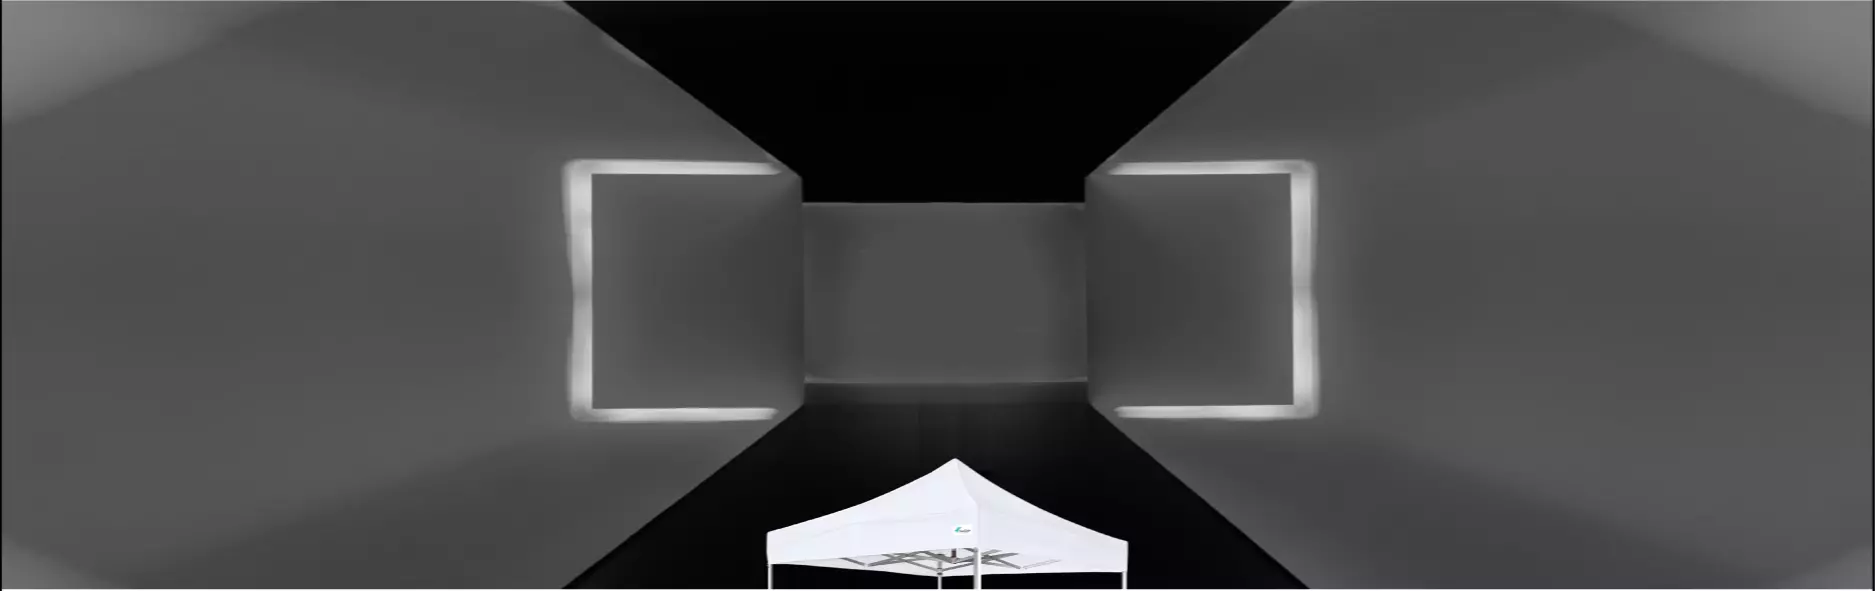 Image of two canopy tents produced under a square photographic light. The lower one has a white weshtshade canopy tent